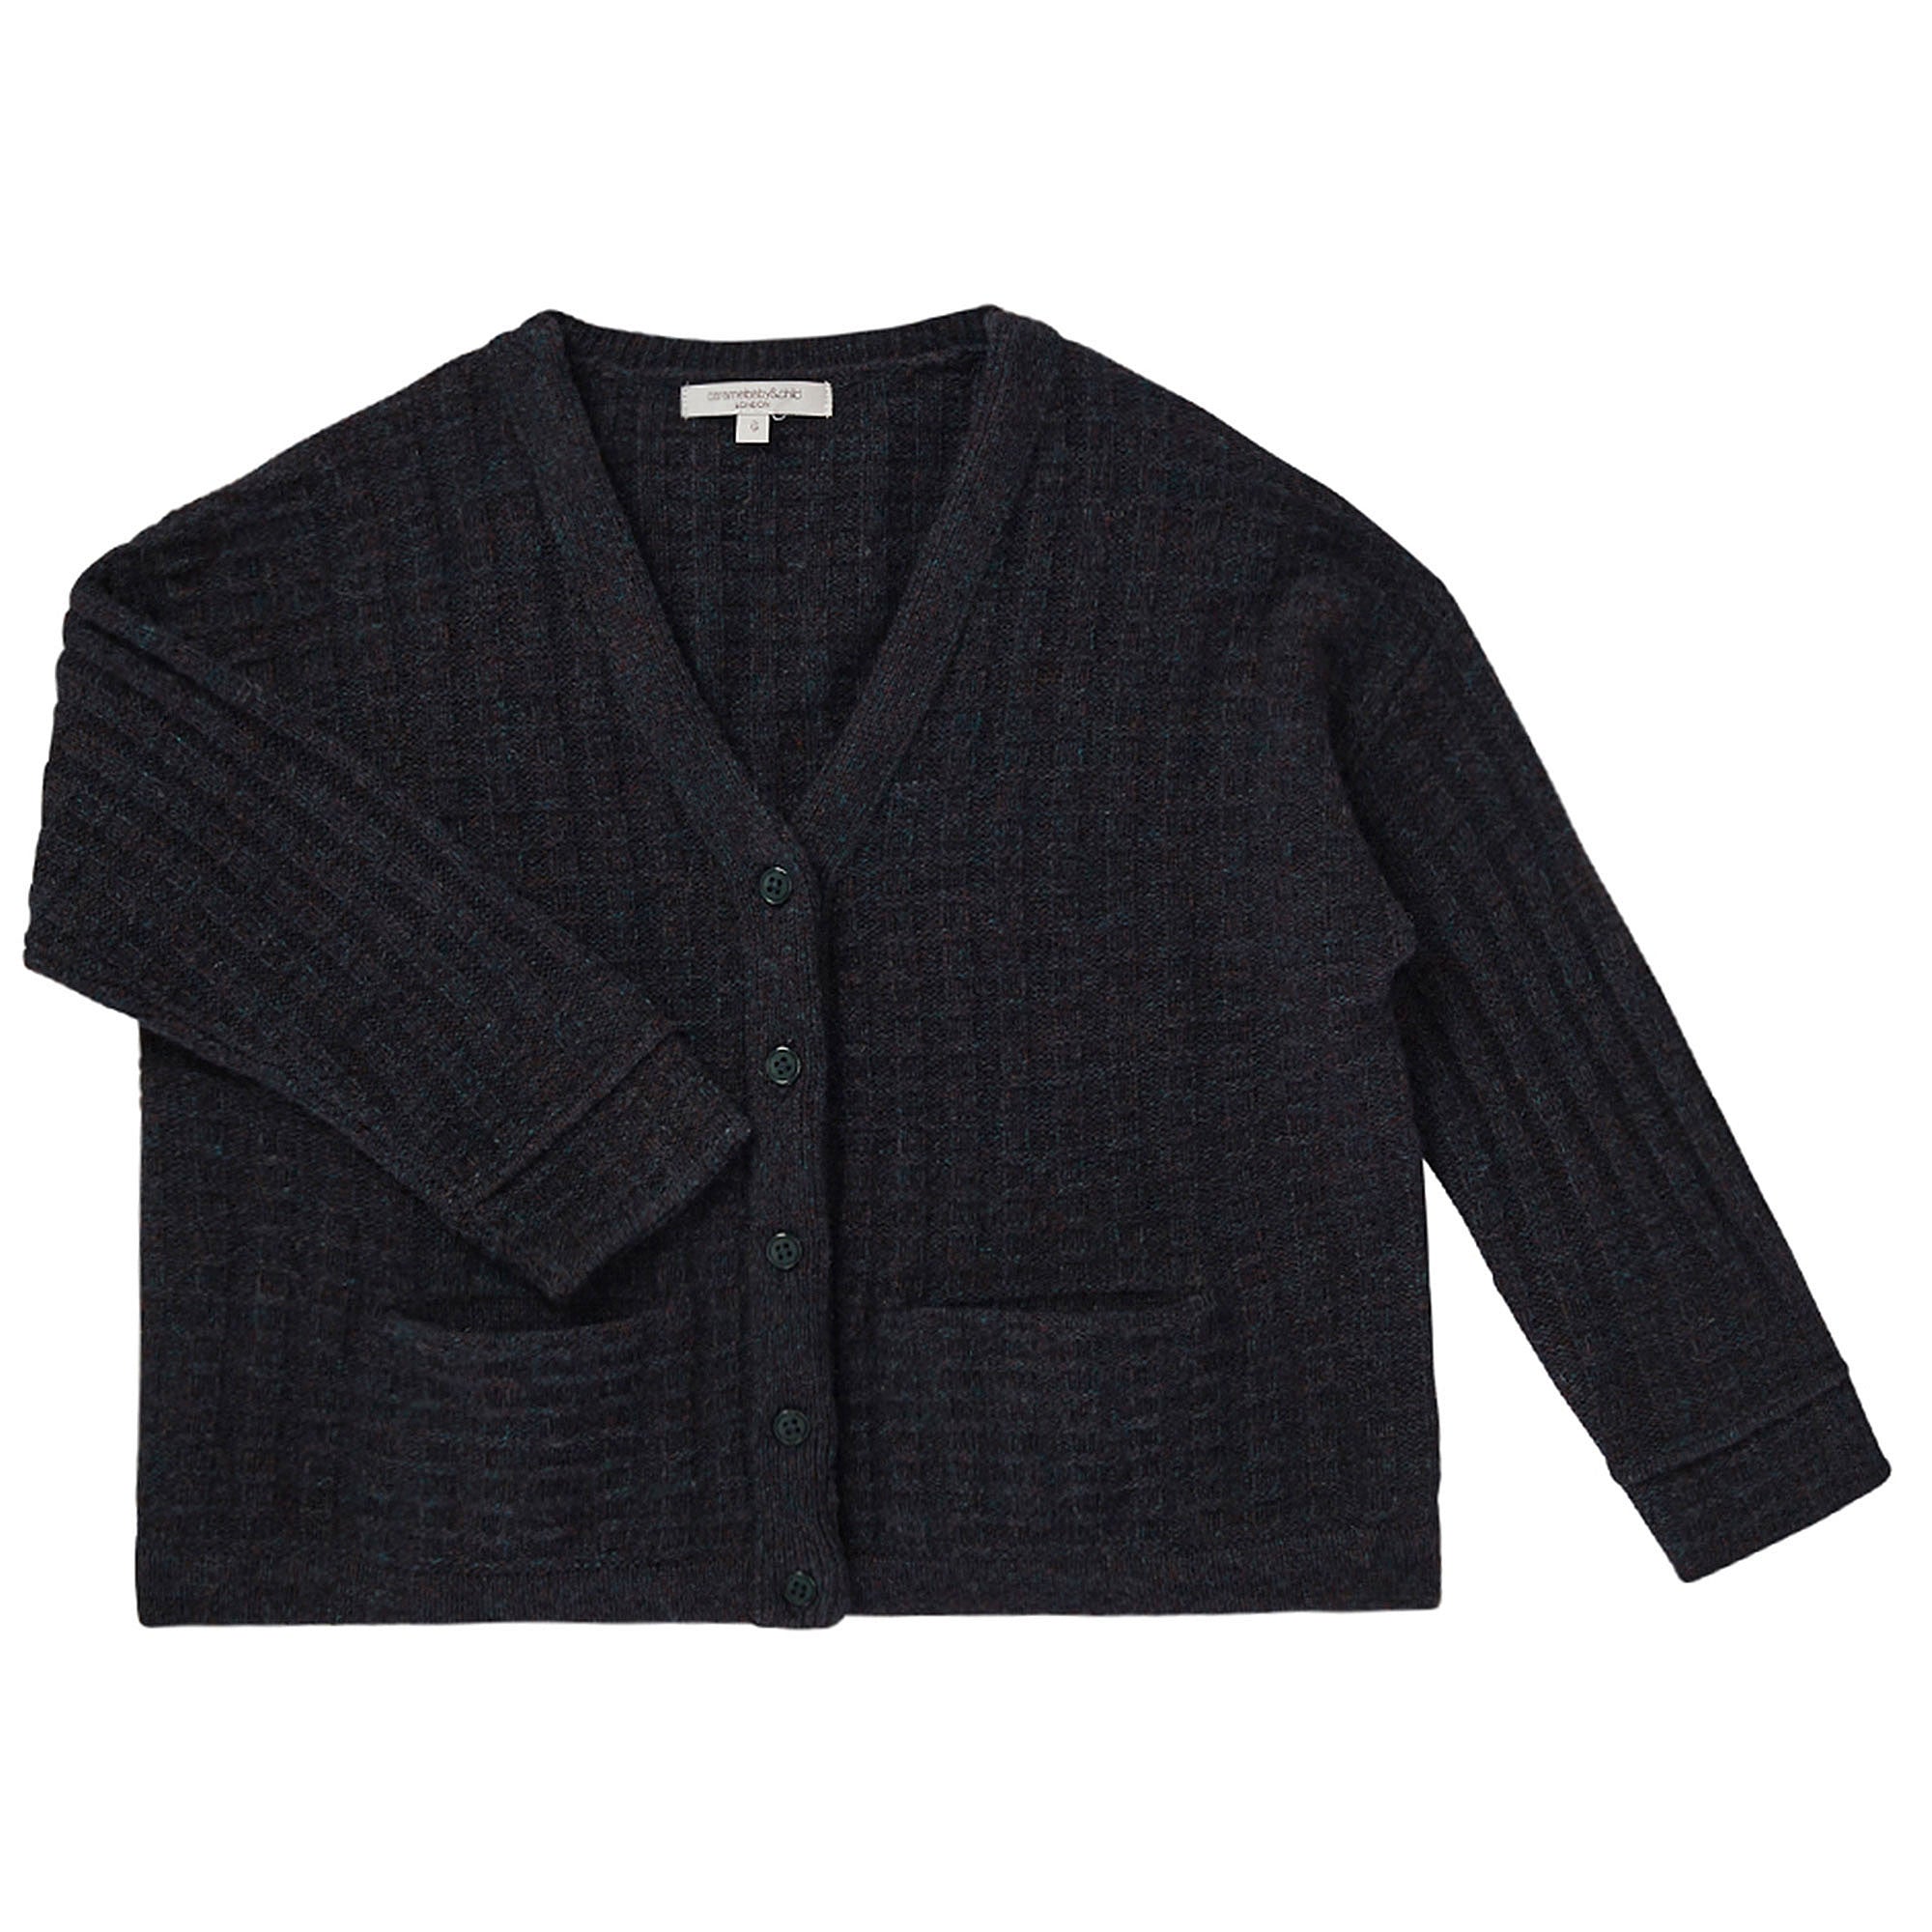 Boys Black Knitted Wool Cardigans With Patch Pocket - CÉMAROSE | Children's Fashion Store - 1